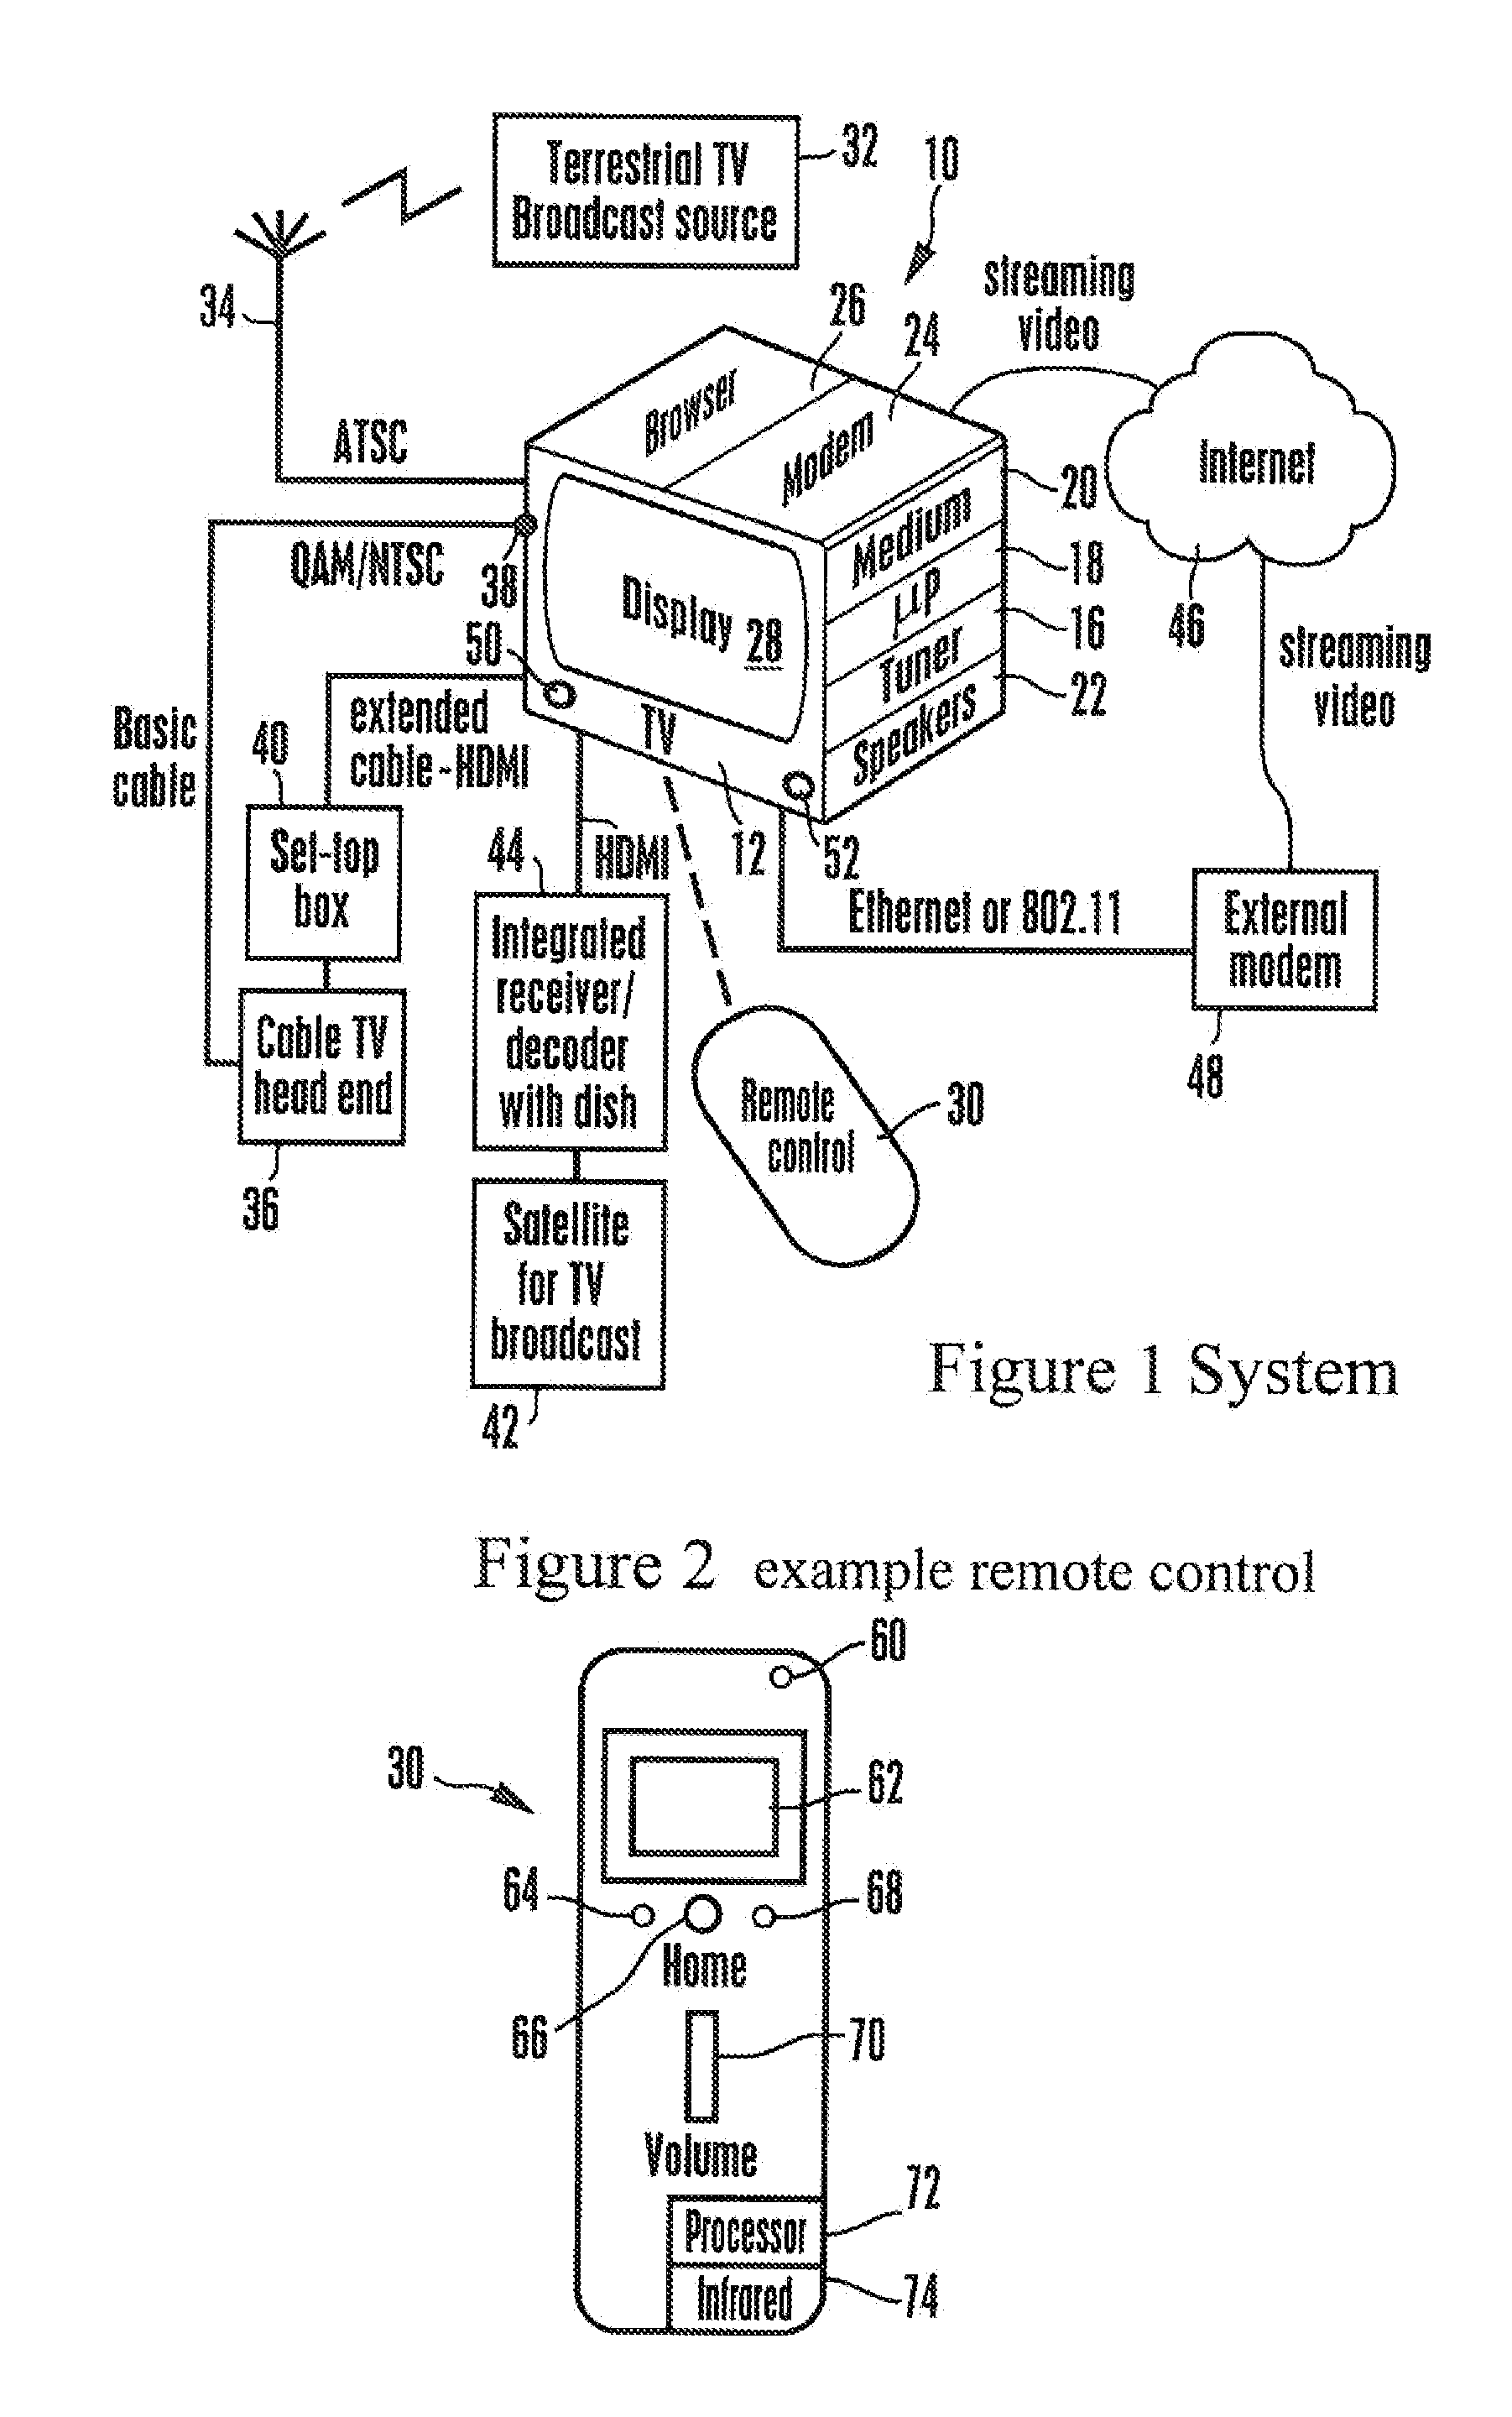 User interface for audio video display device such as TV